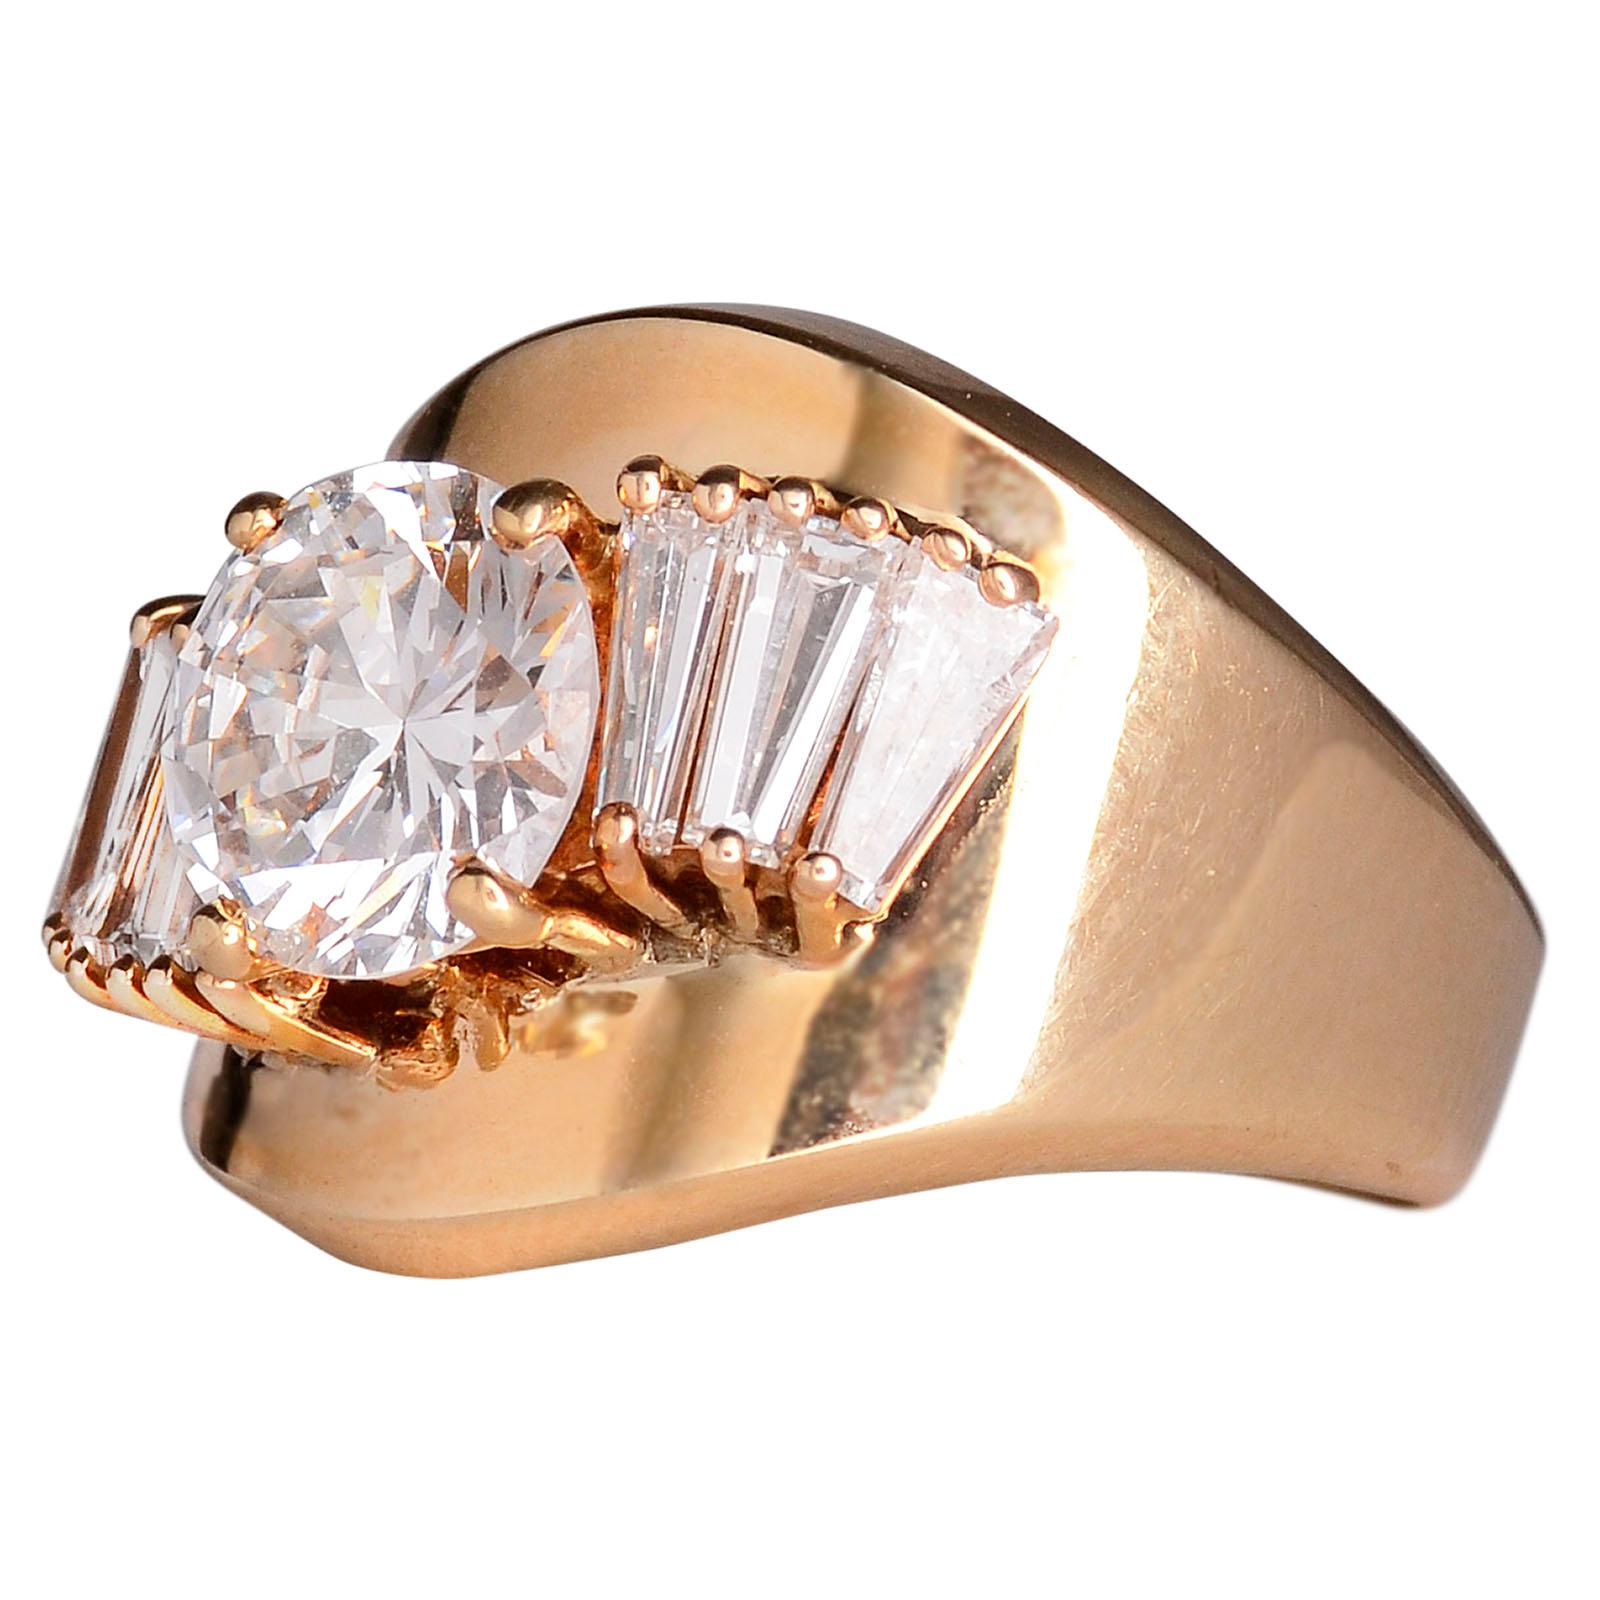 Estate 2.0 carat VS center diamond ring. This 14 karat yellow gold ring has a 2.0 carat center diamond with VS2 clarity and G color. The estate diamond ring is accented with six tapered baguette diamonds at 1.80 carat total weight with VS1-2 clarity